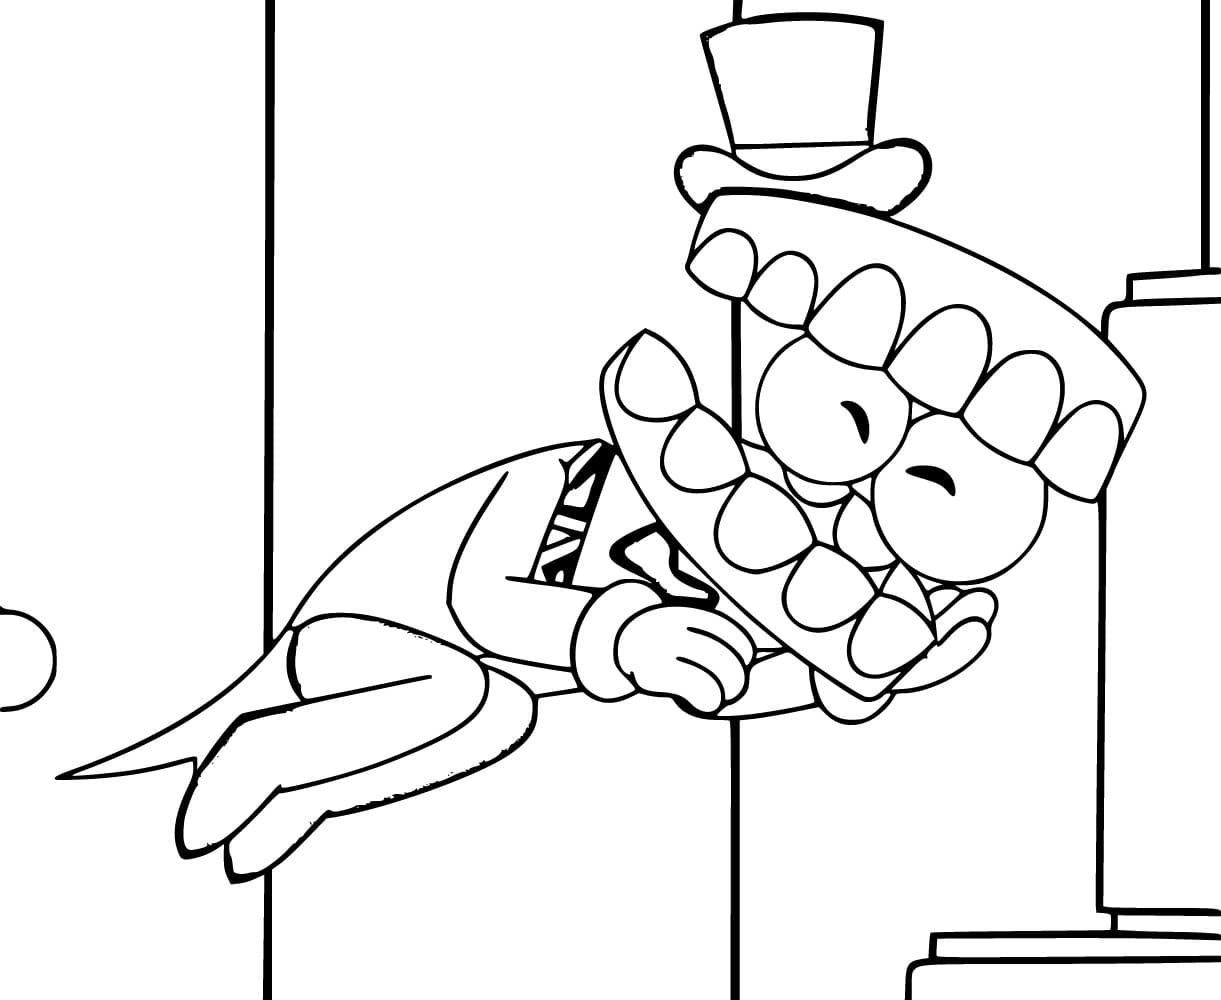 The amazing digital circus free printable coloring page